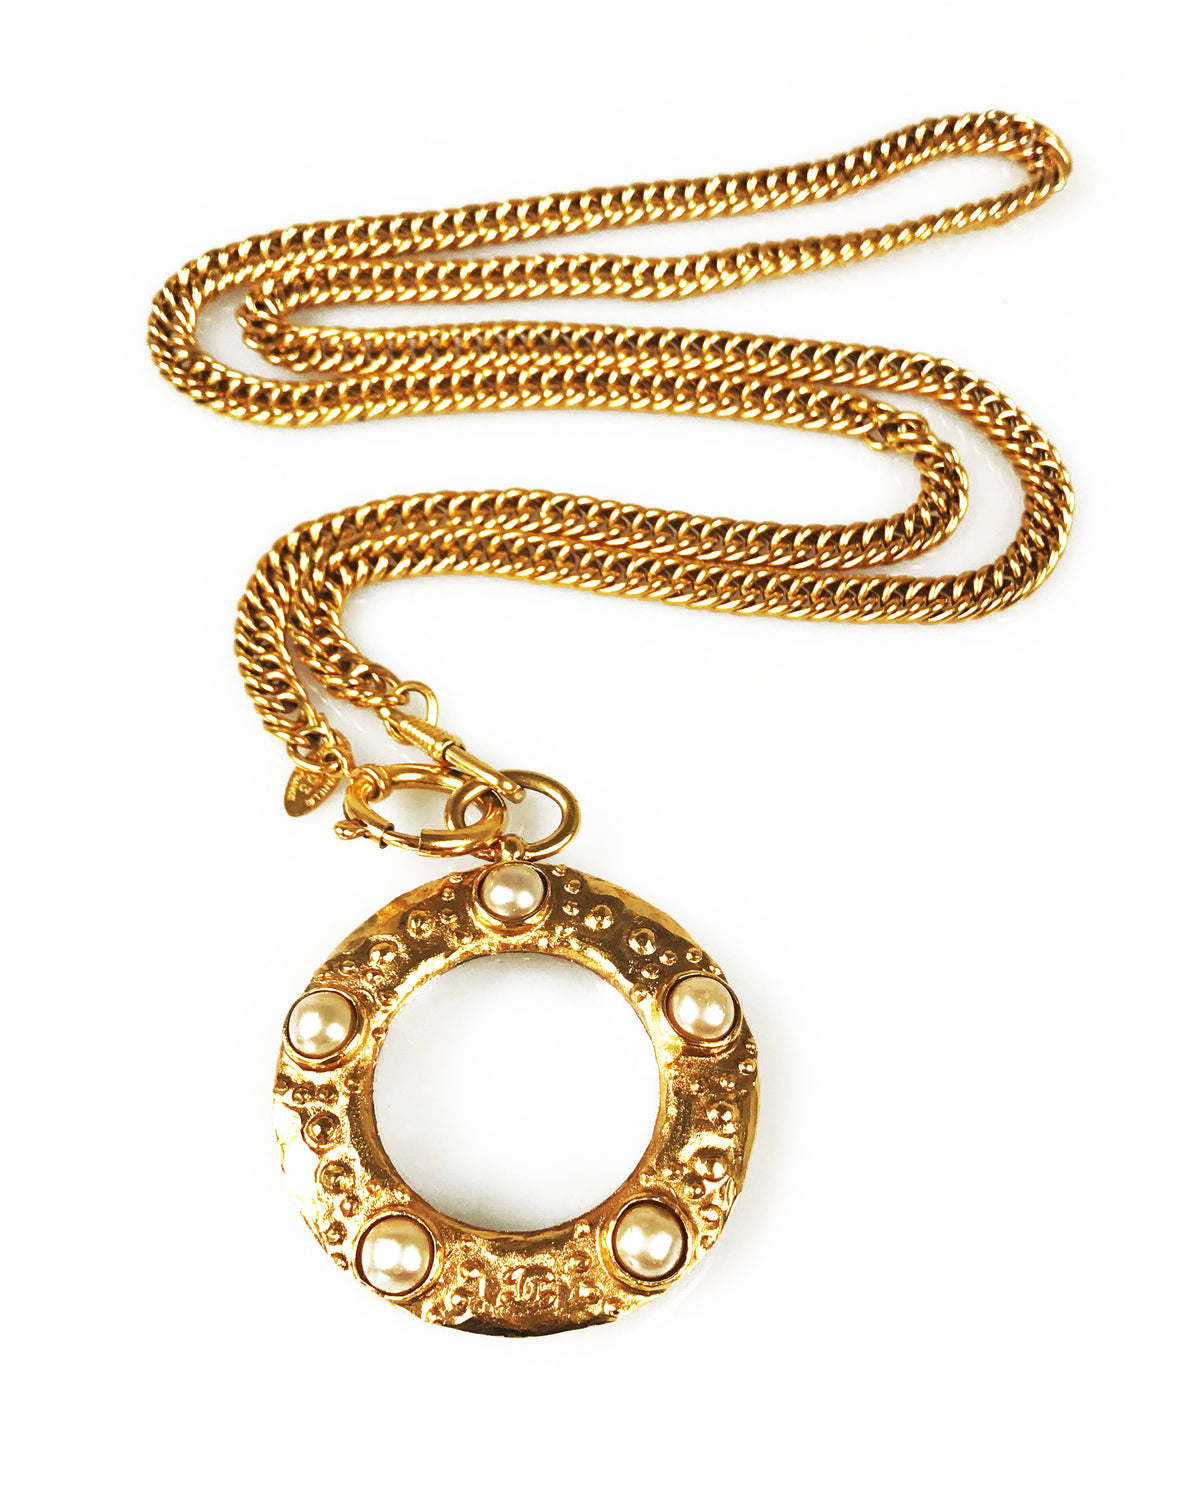 CHANEL - Vintage 1970s Faux Pearl Medallion CC 'CHANEL' Clip-On